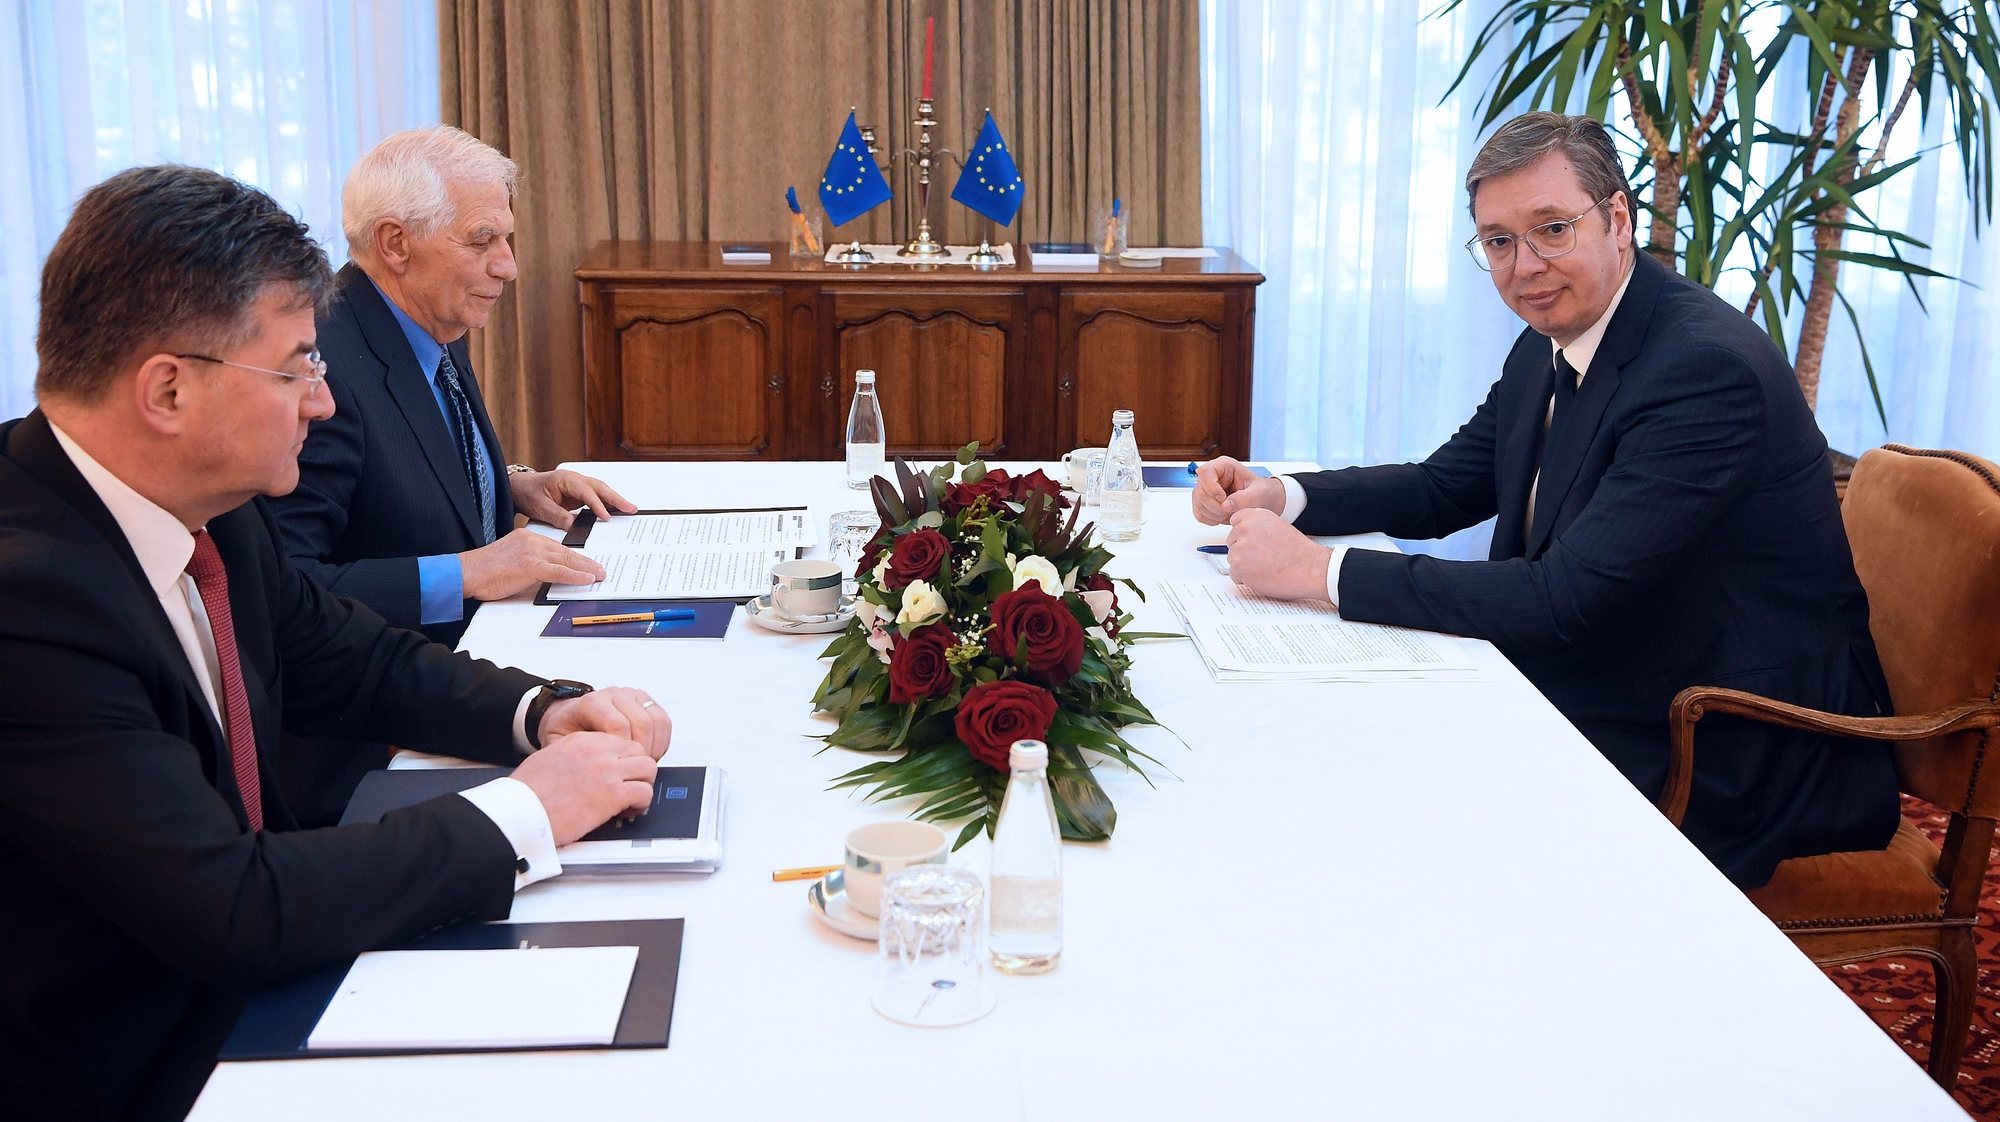 epa10530472 EU High Representative for Foreign Affairs and Security Policy Josep Borrell (C) and EU Special Representative Miroslav Lajcak (L) meet with Serbian President Aleksandar Vucic (R), during the High-level Meeting of the Belgrade-Pristina Dialogue in Ohrid, Republic of North Macedonia, 18 March 2023. International diplomats are trying to make progress with the so-called &#039;French - German&#039; plan in an effort to normalize the ties between Kosovo and Serbia.  EPA/DIMITRIJE GOLL